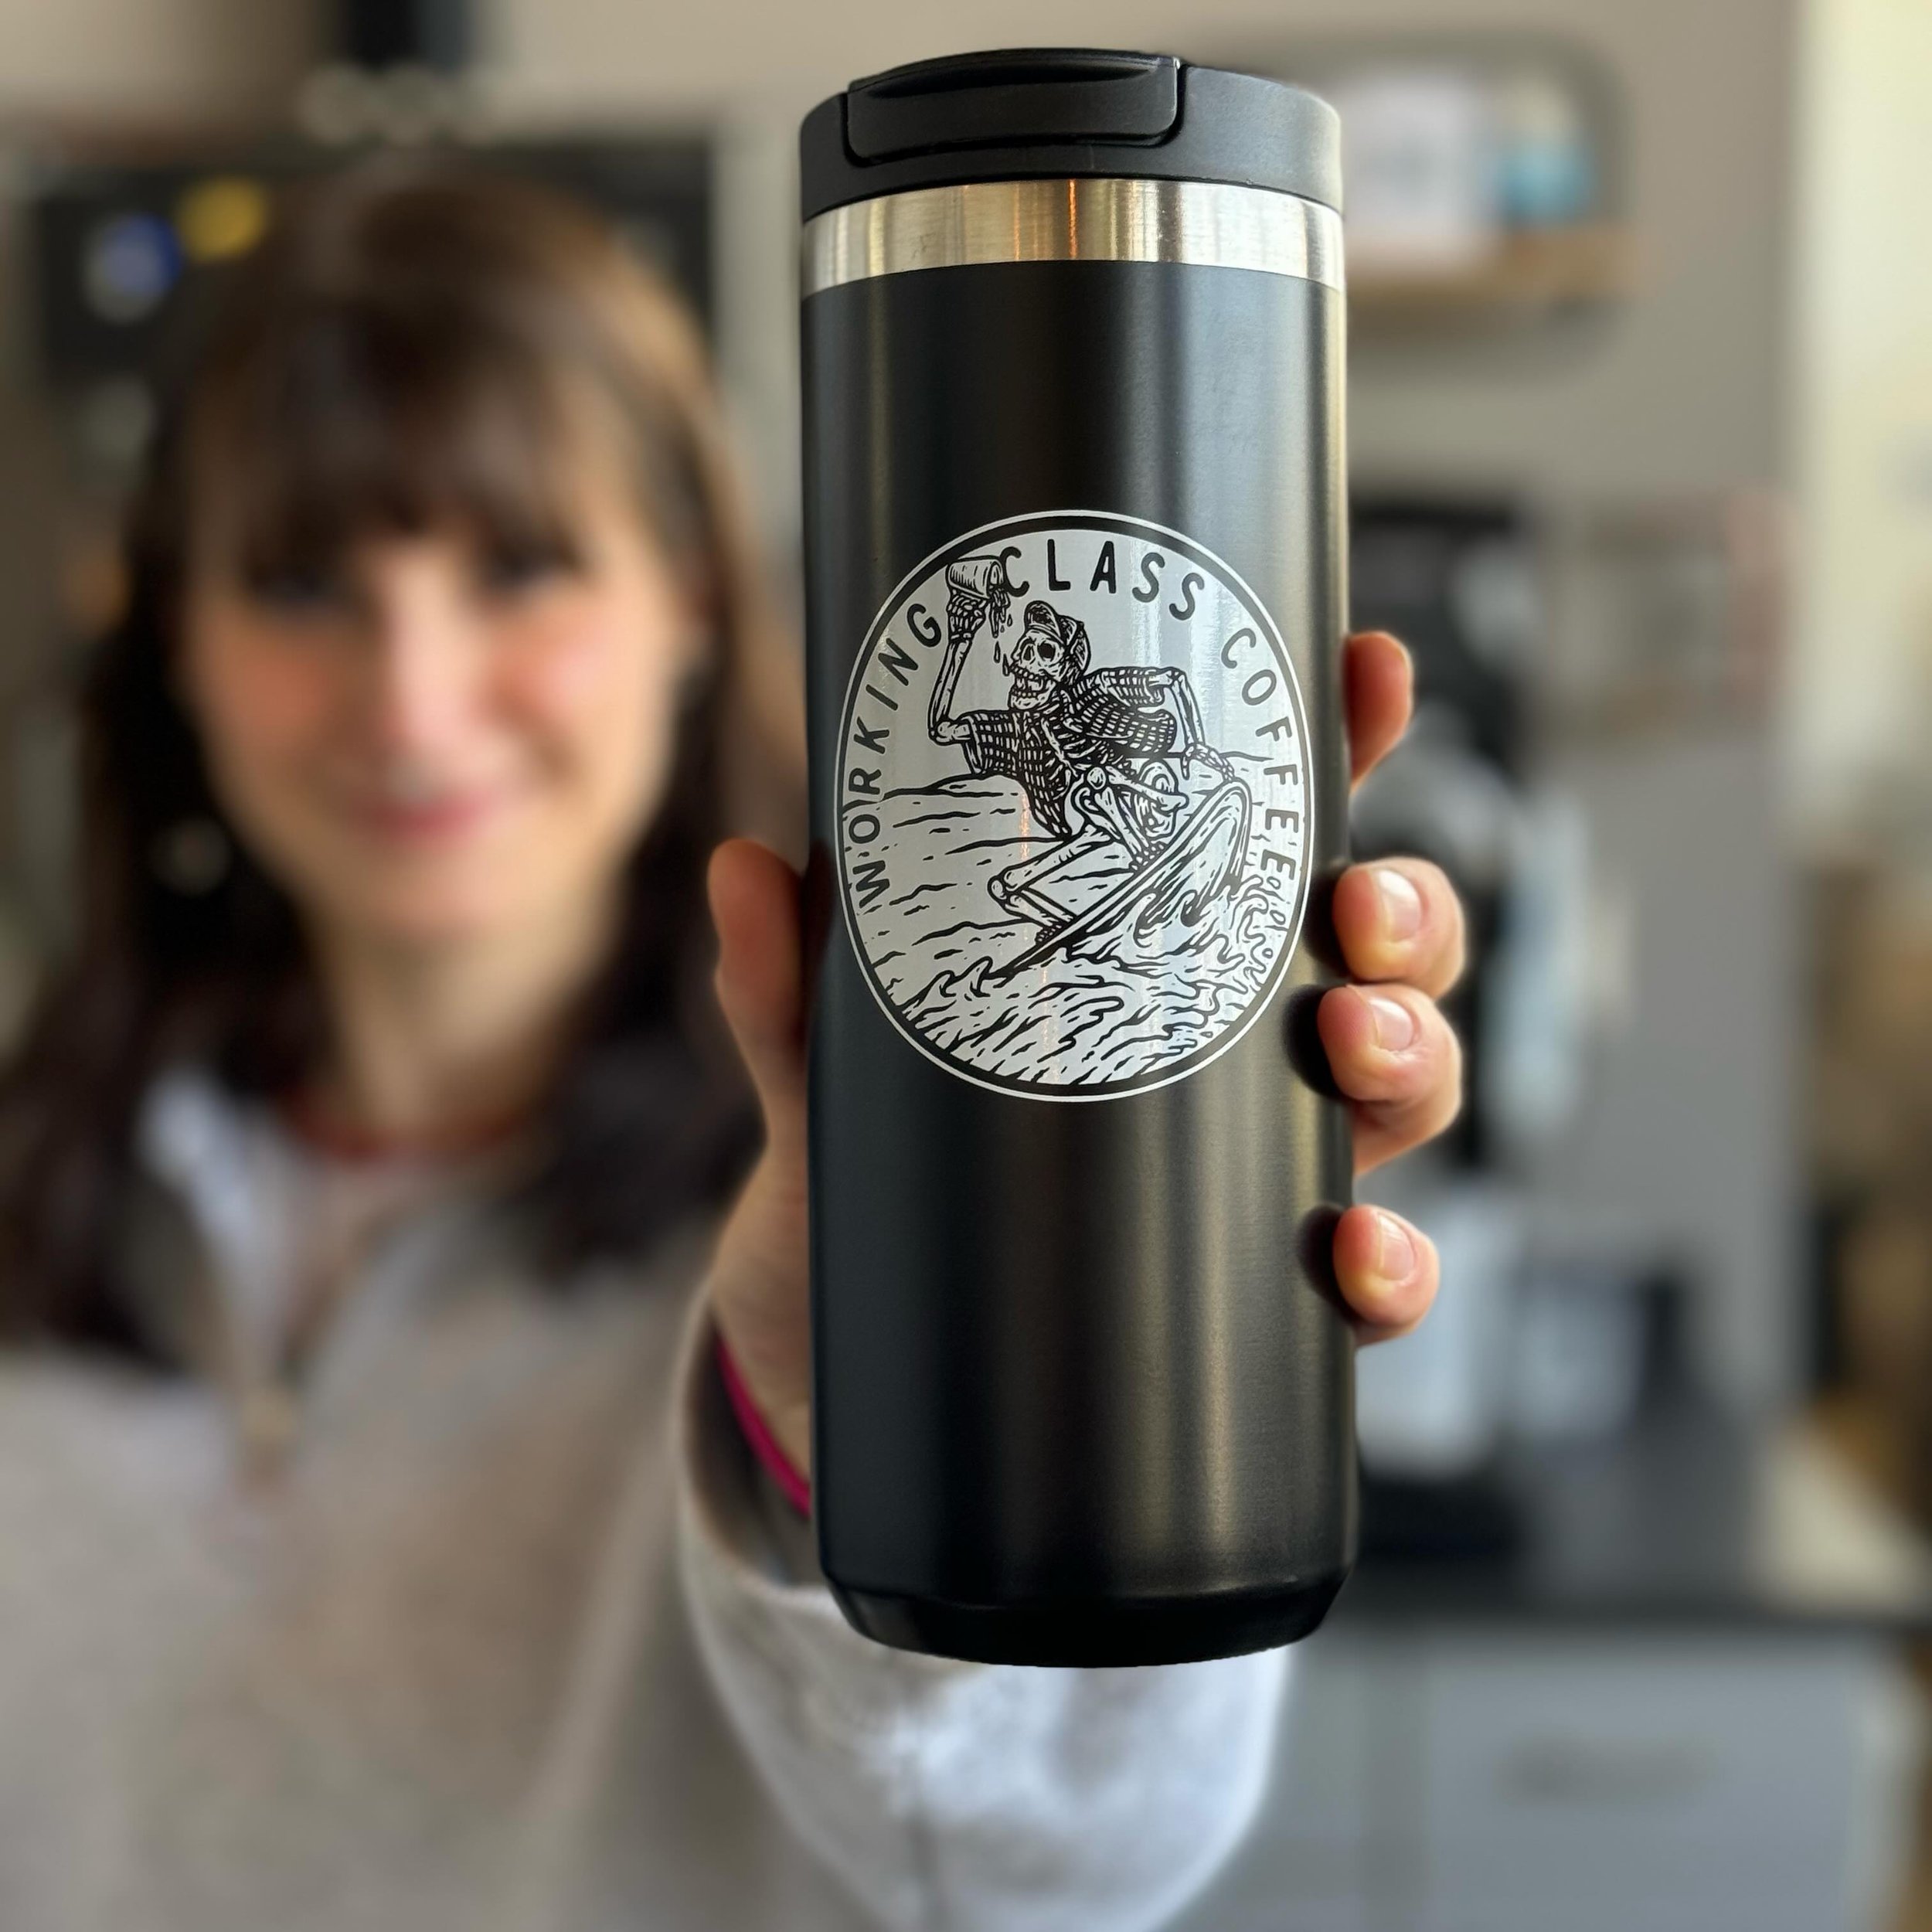 Introducing the Mug Club for 2024

GOING ON SALE WEDNESDAY MAY 1 @ 7am!

New Year - New Design - New Perks
(quantities are limited so act fast)

$150
-Bottomless Hot or Iced Coffee
-$3 off retail coffee bags